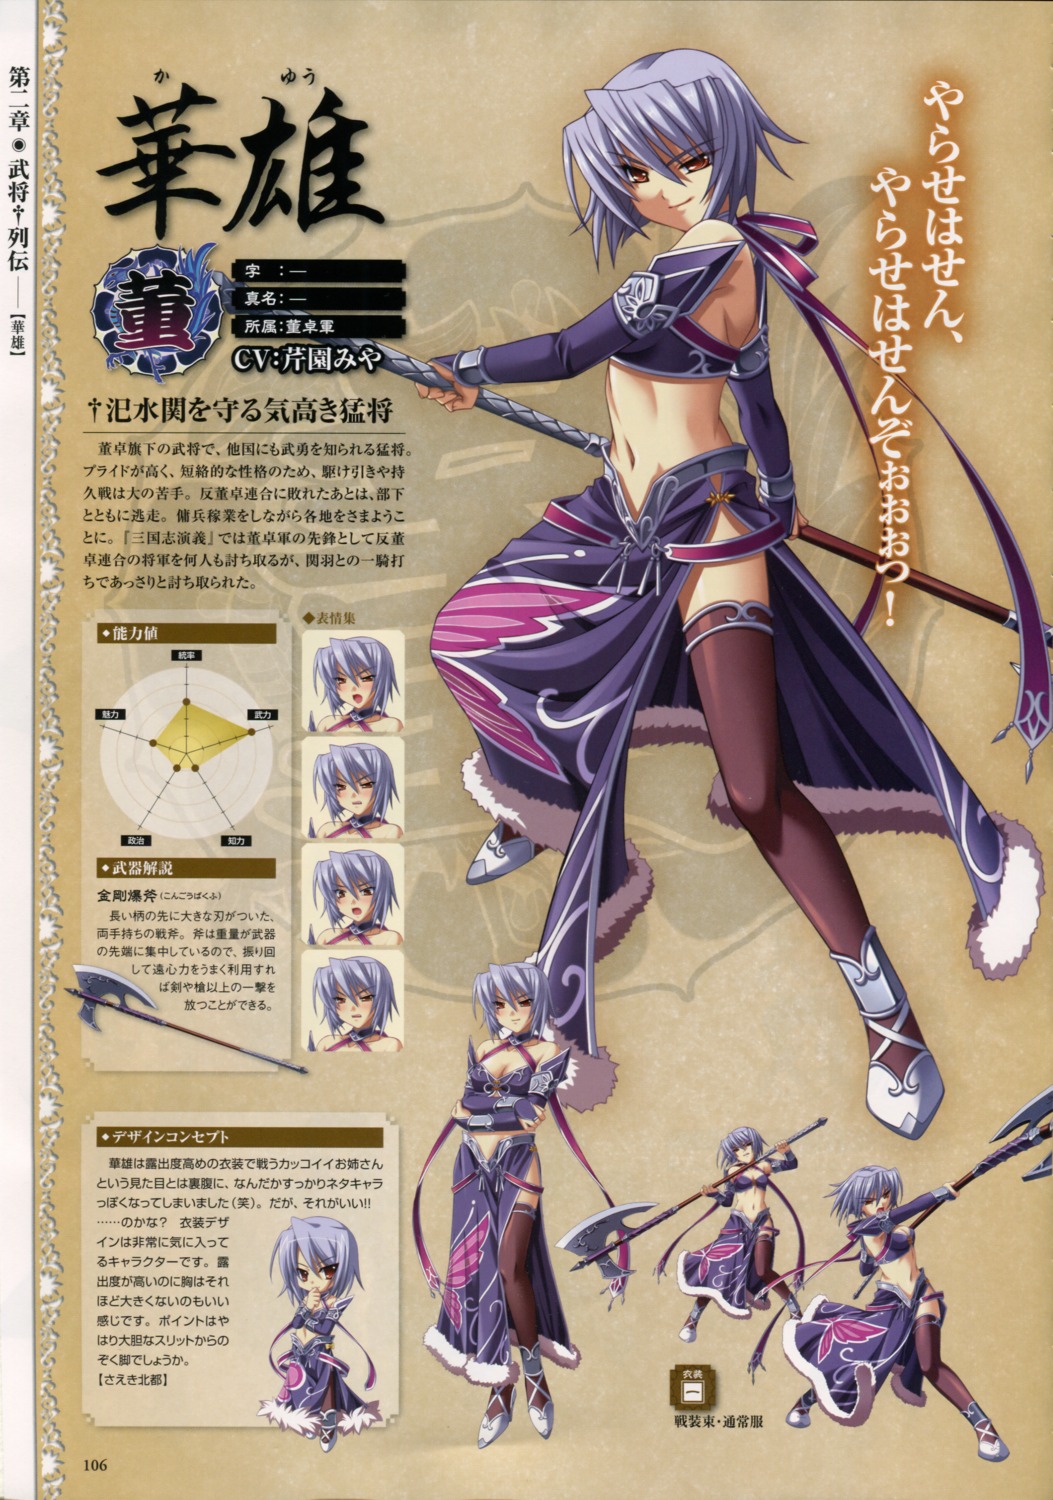 baseson character_design chibi expression kayuu koihime_musou profile_page thighhighs weapon